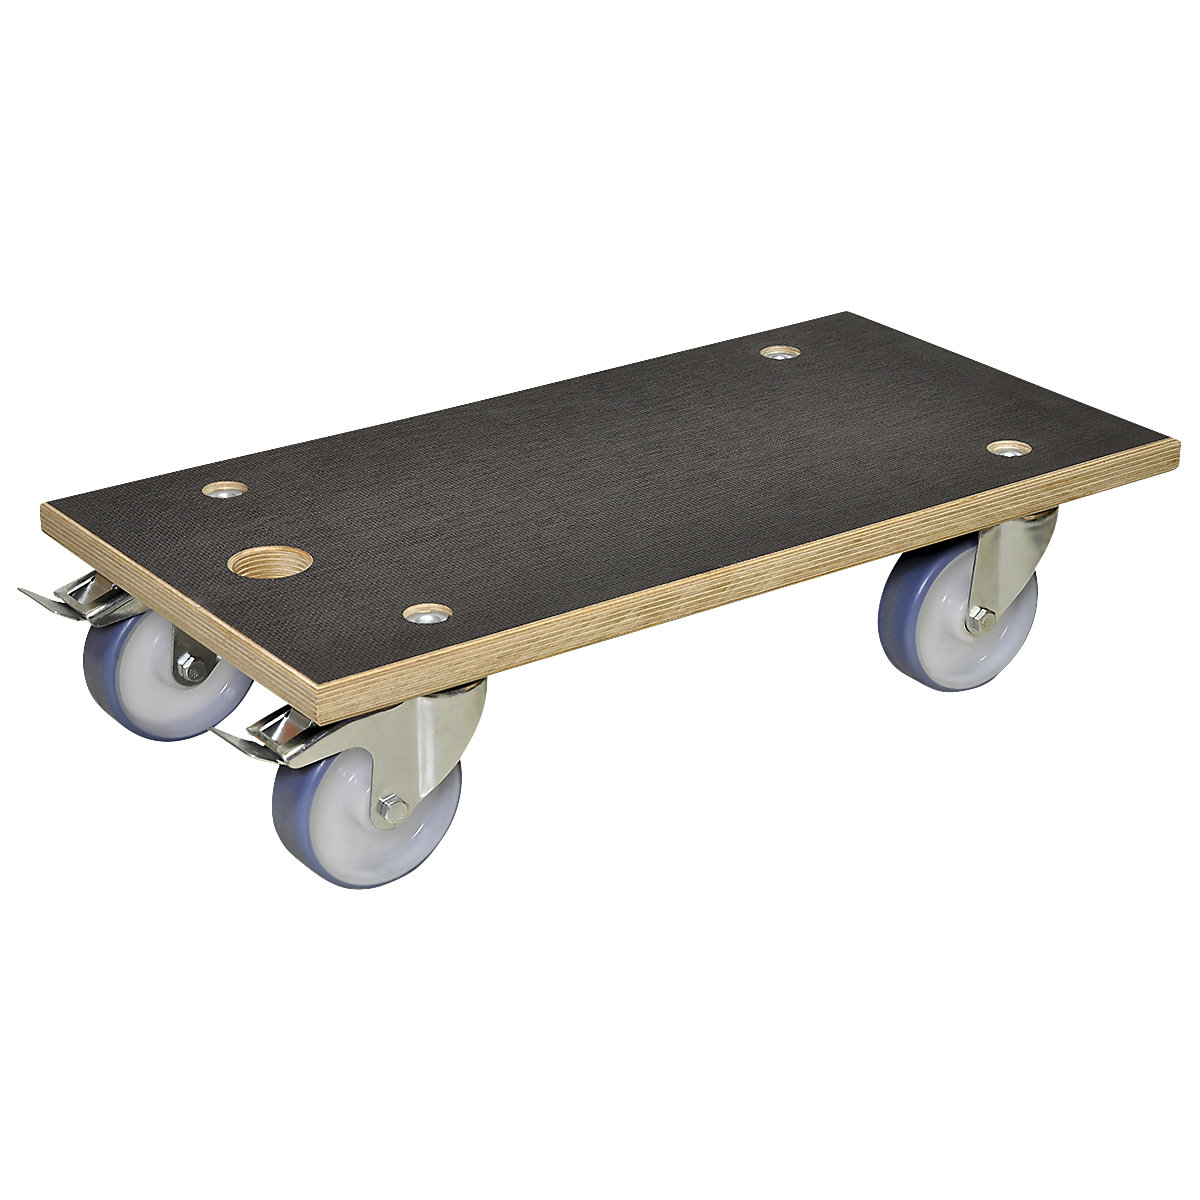 Wagner – MM 1341 transport dolly, LxW 575 x 300 mm, max. load 500 kg, 5+ items